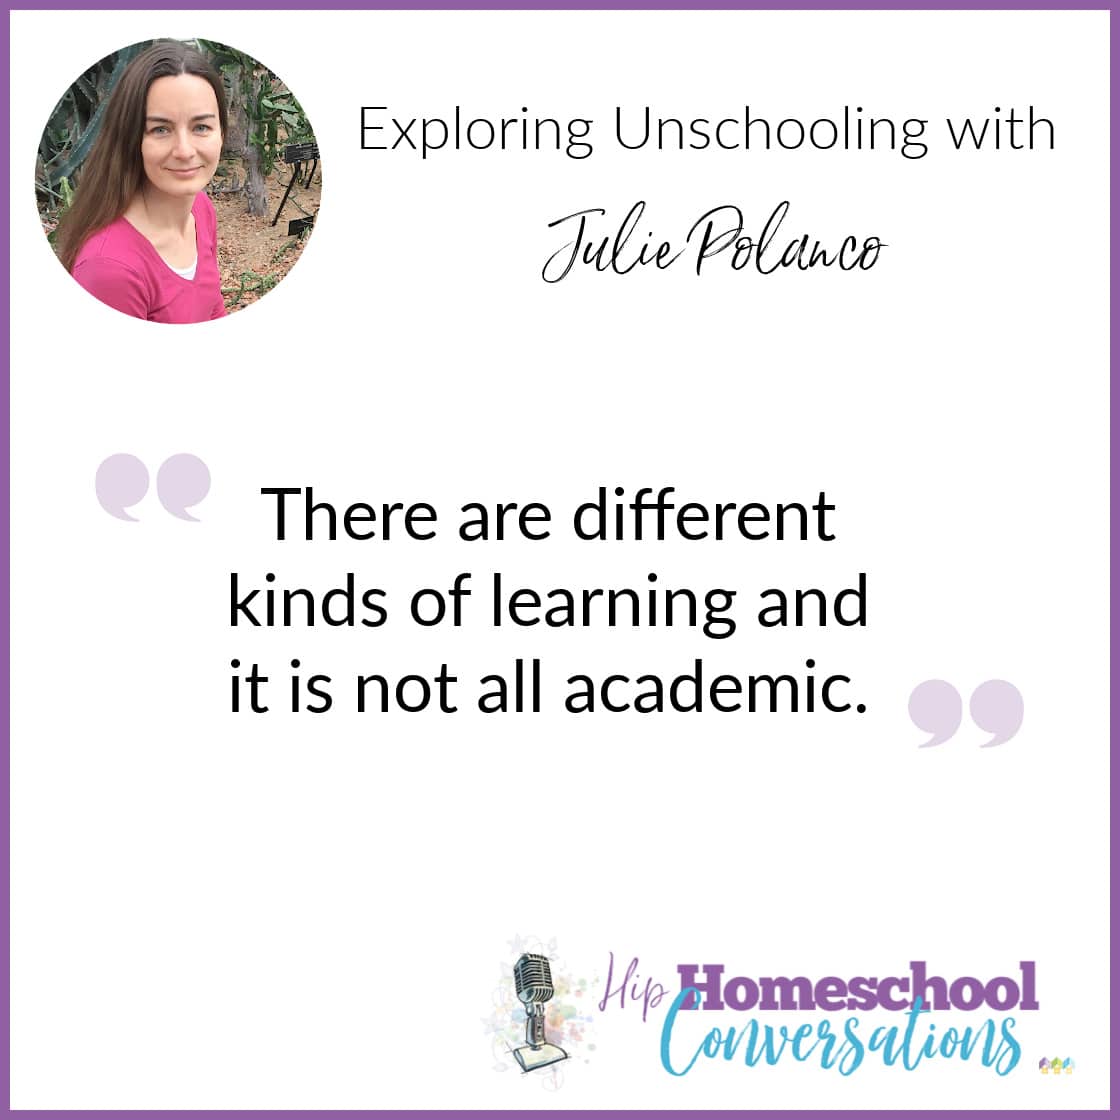 If you’re a free spirit who wants to homeschool, you’ve come to the right podcast episode! Julie Polanco is an unschooling mom of four, six-time author, and Master Herbalist whose journey will inspire you to seek the fun and flexibility you desire in your homeschool.